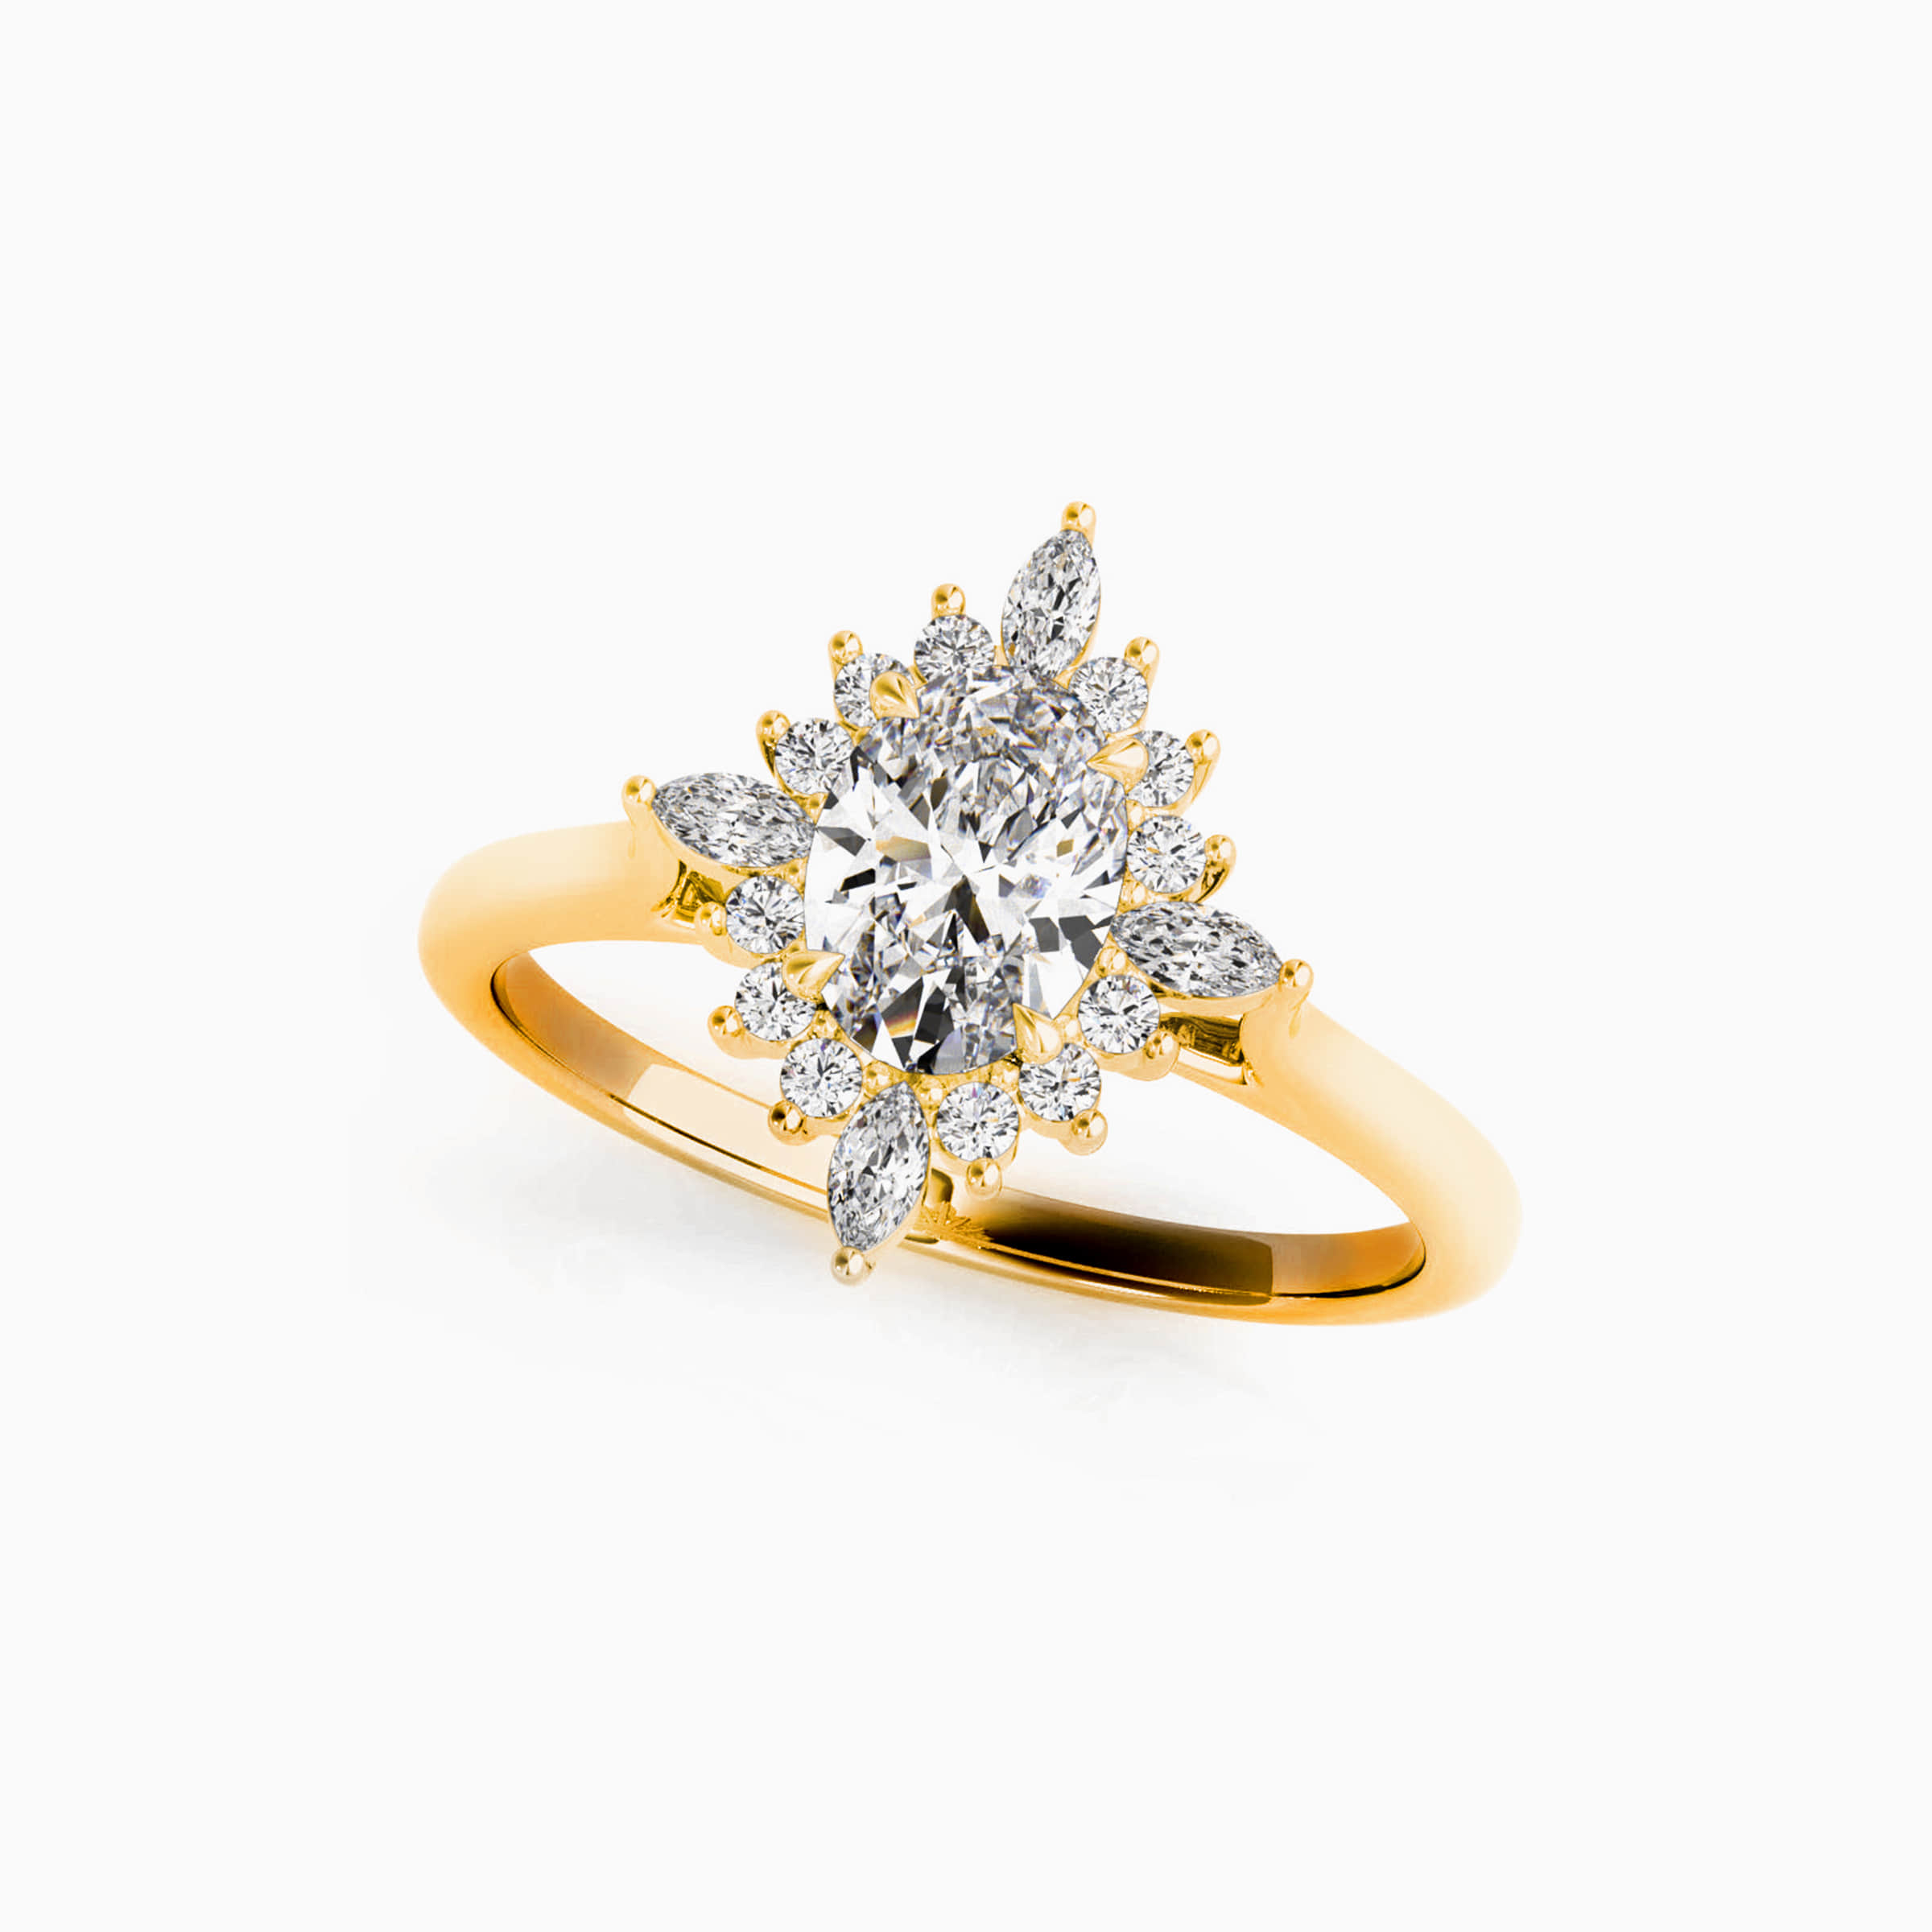 Darry Ring oval cut promise ring in yellow gold